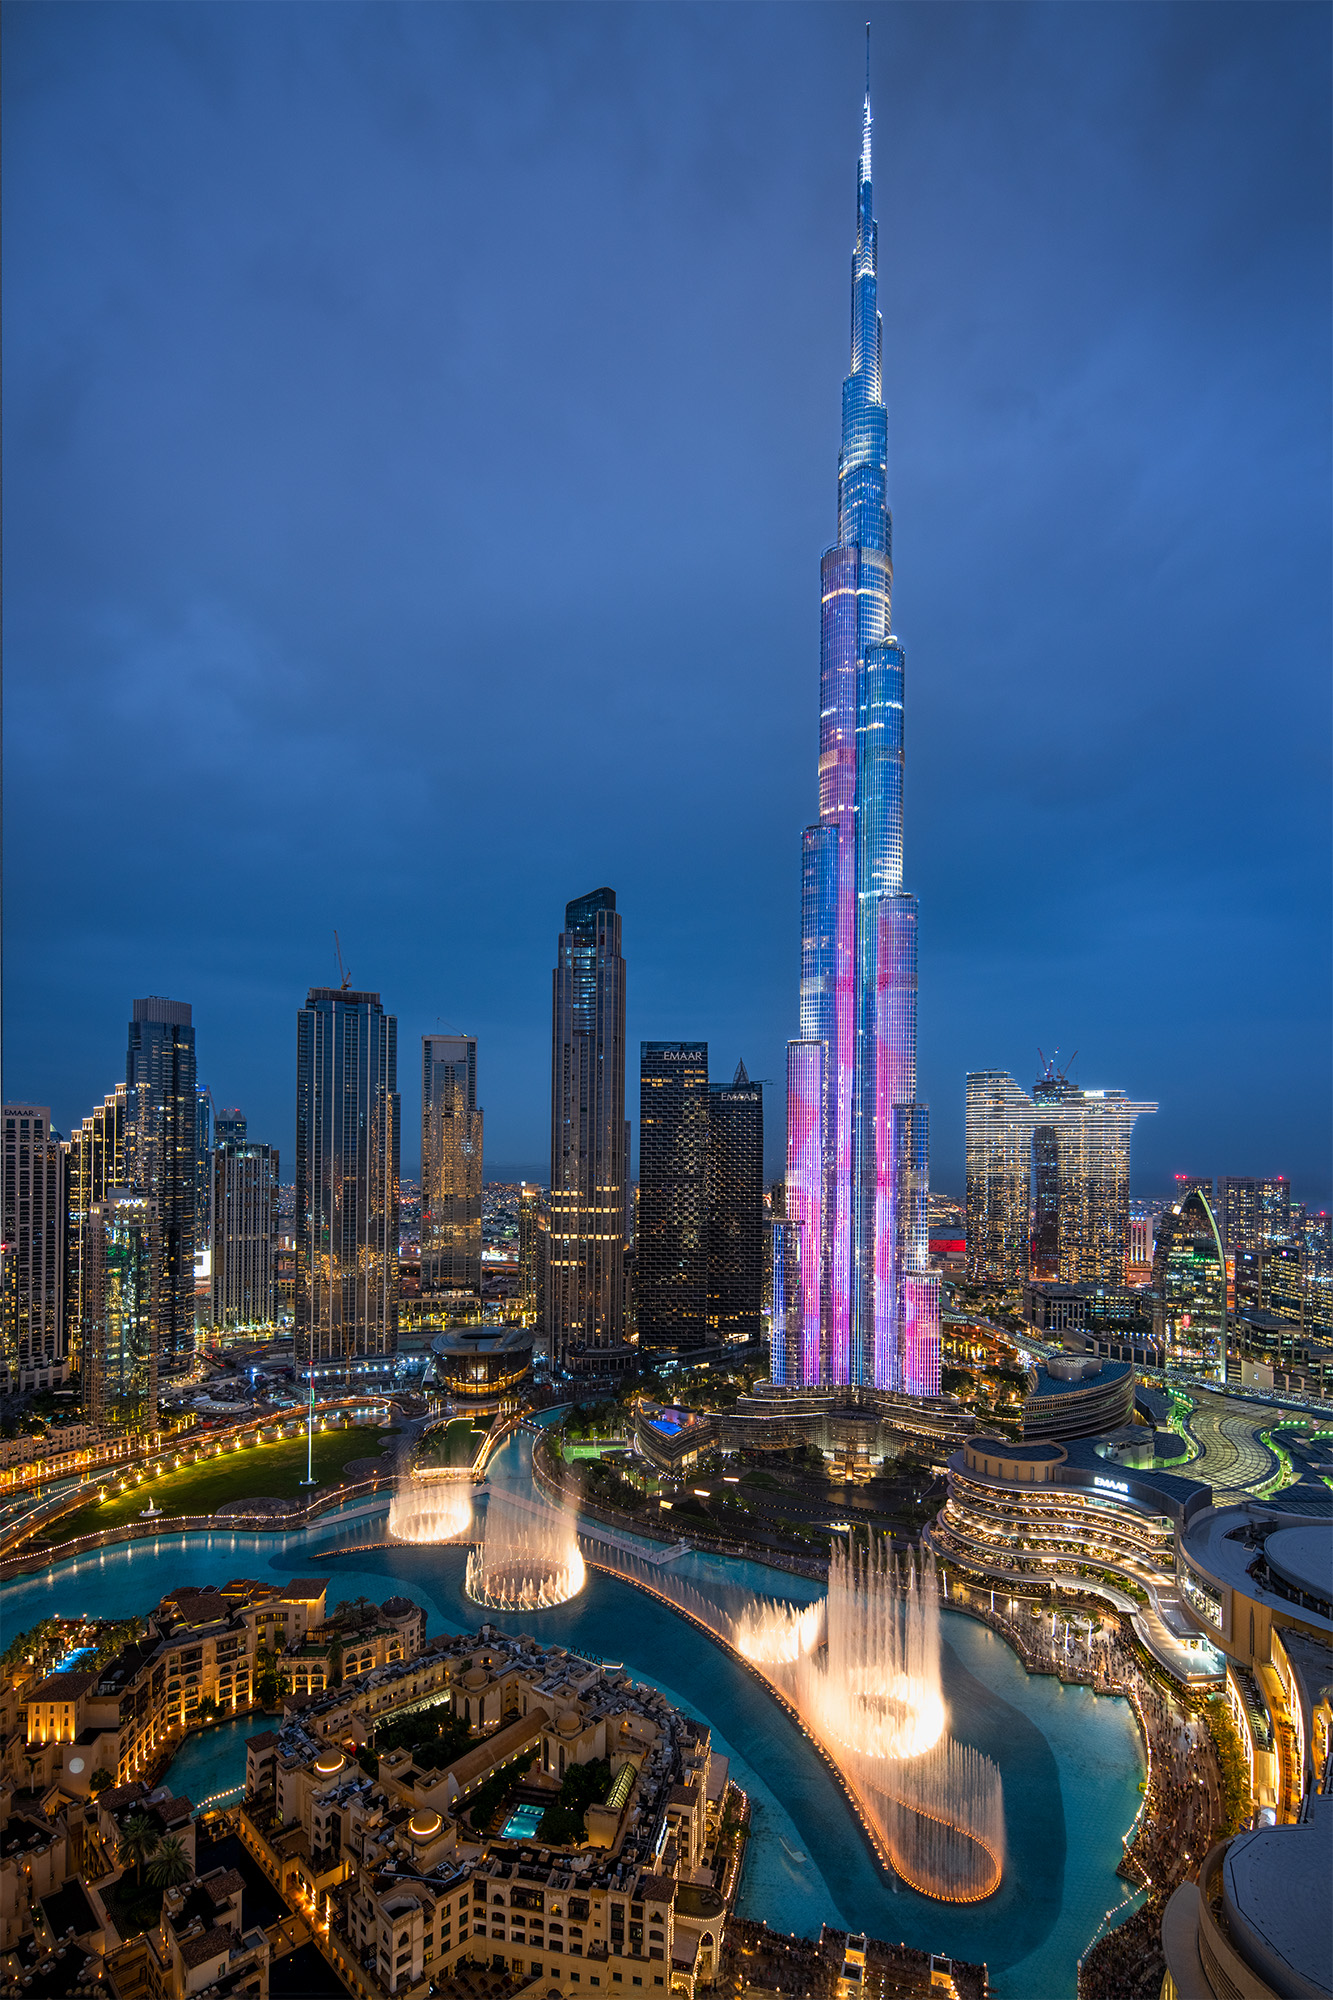 At sunset the Burj Khalifa goes through a combined light show with some of the tallest fountains in the world.  This image is...